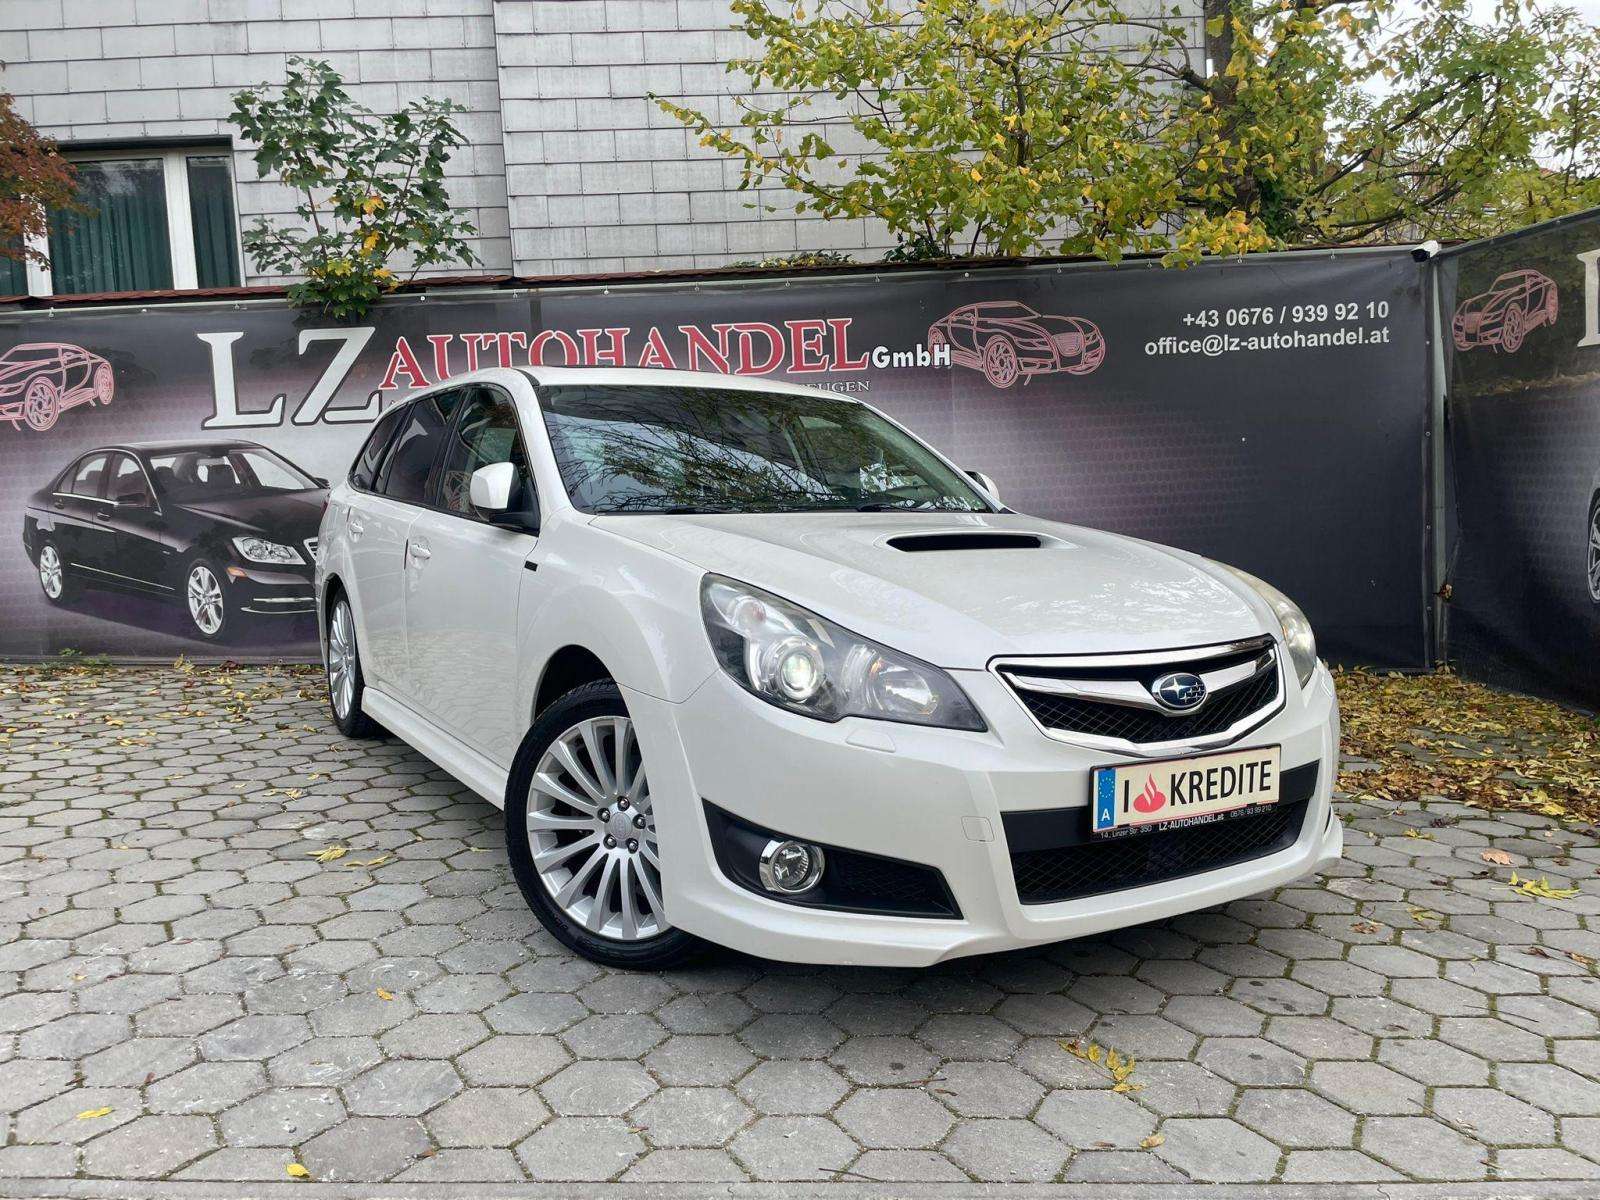 Subaru Legacy Station wagon in White used in Wien for € 8,990.-